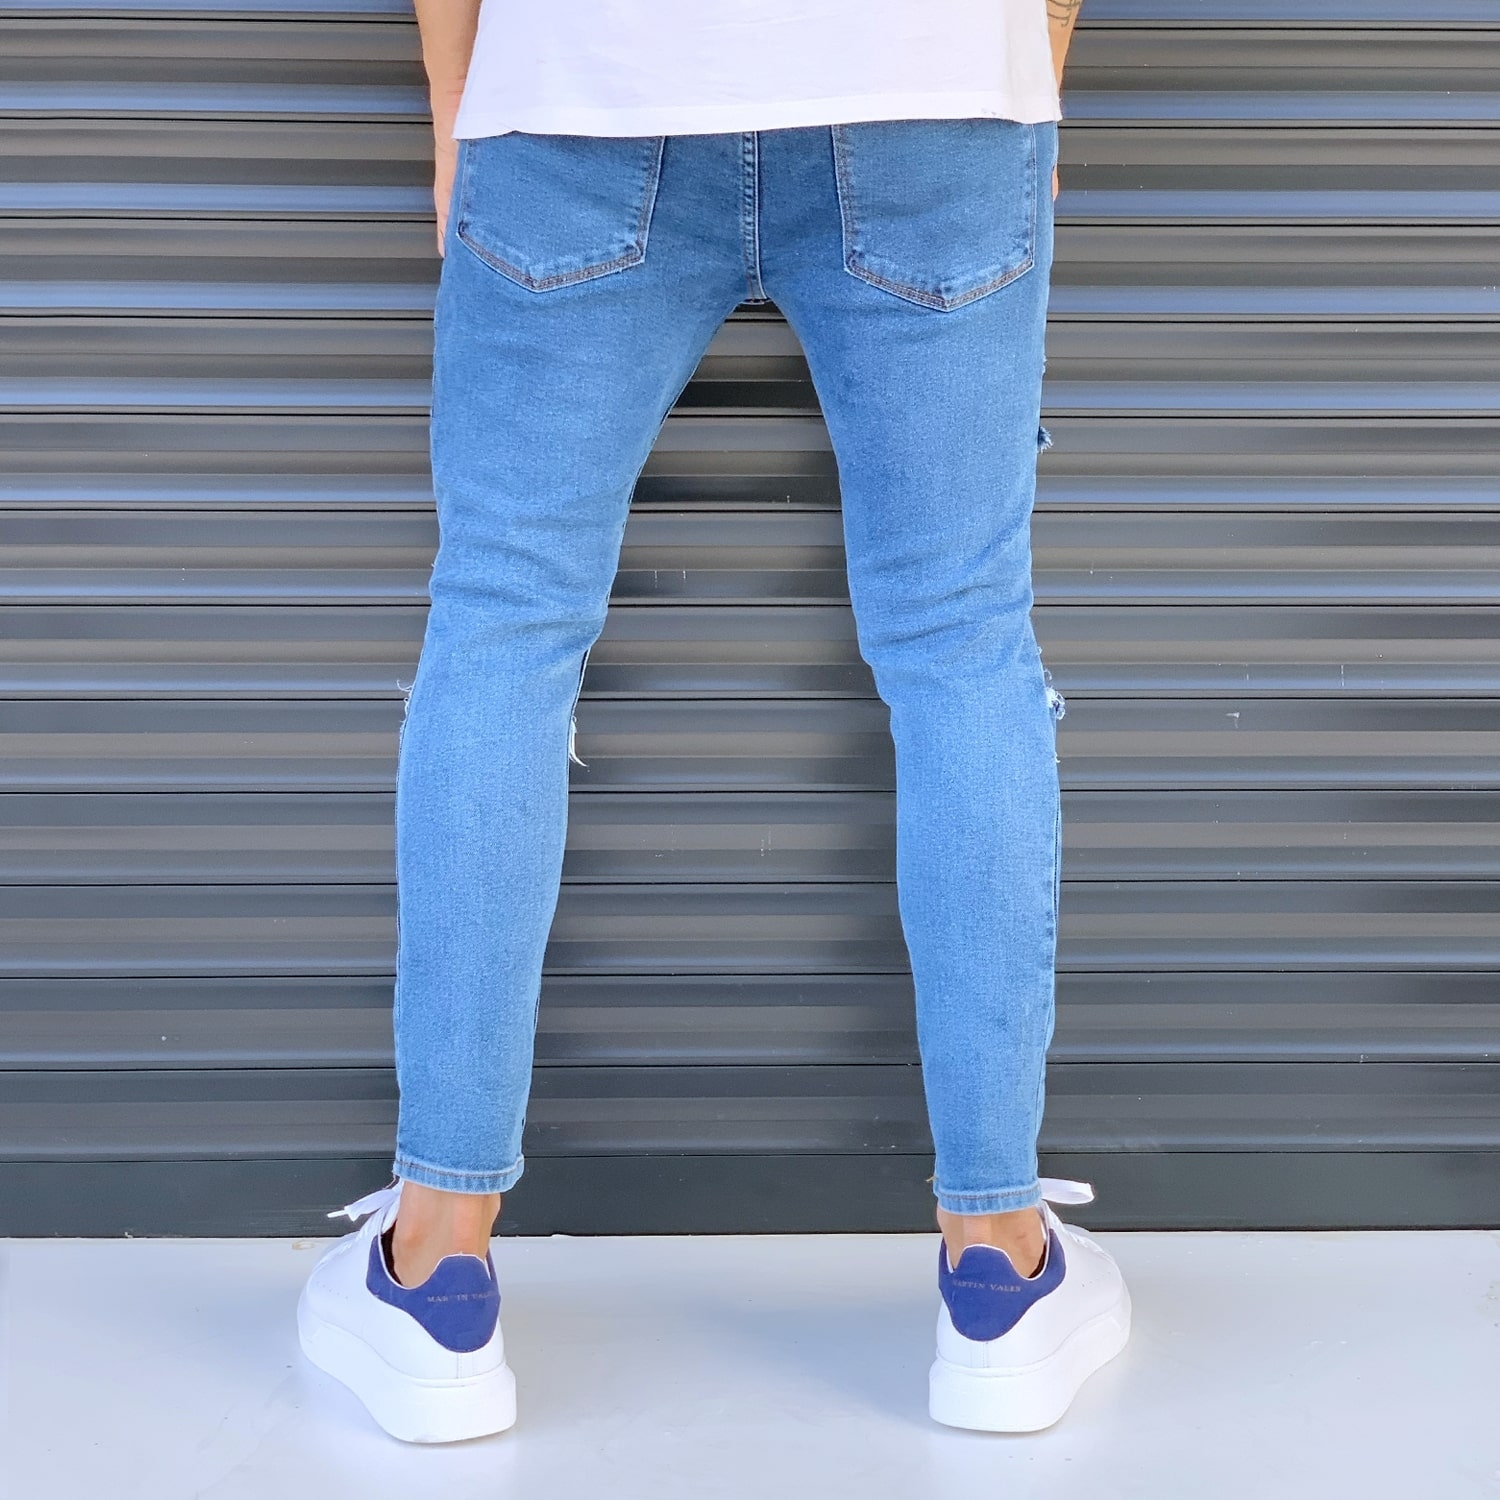 Men's Street Jeans With Rips And Patchworks Blue